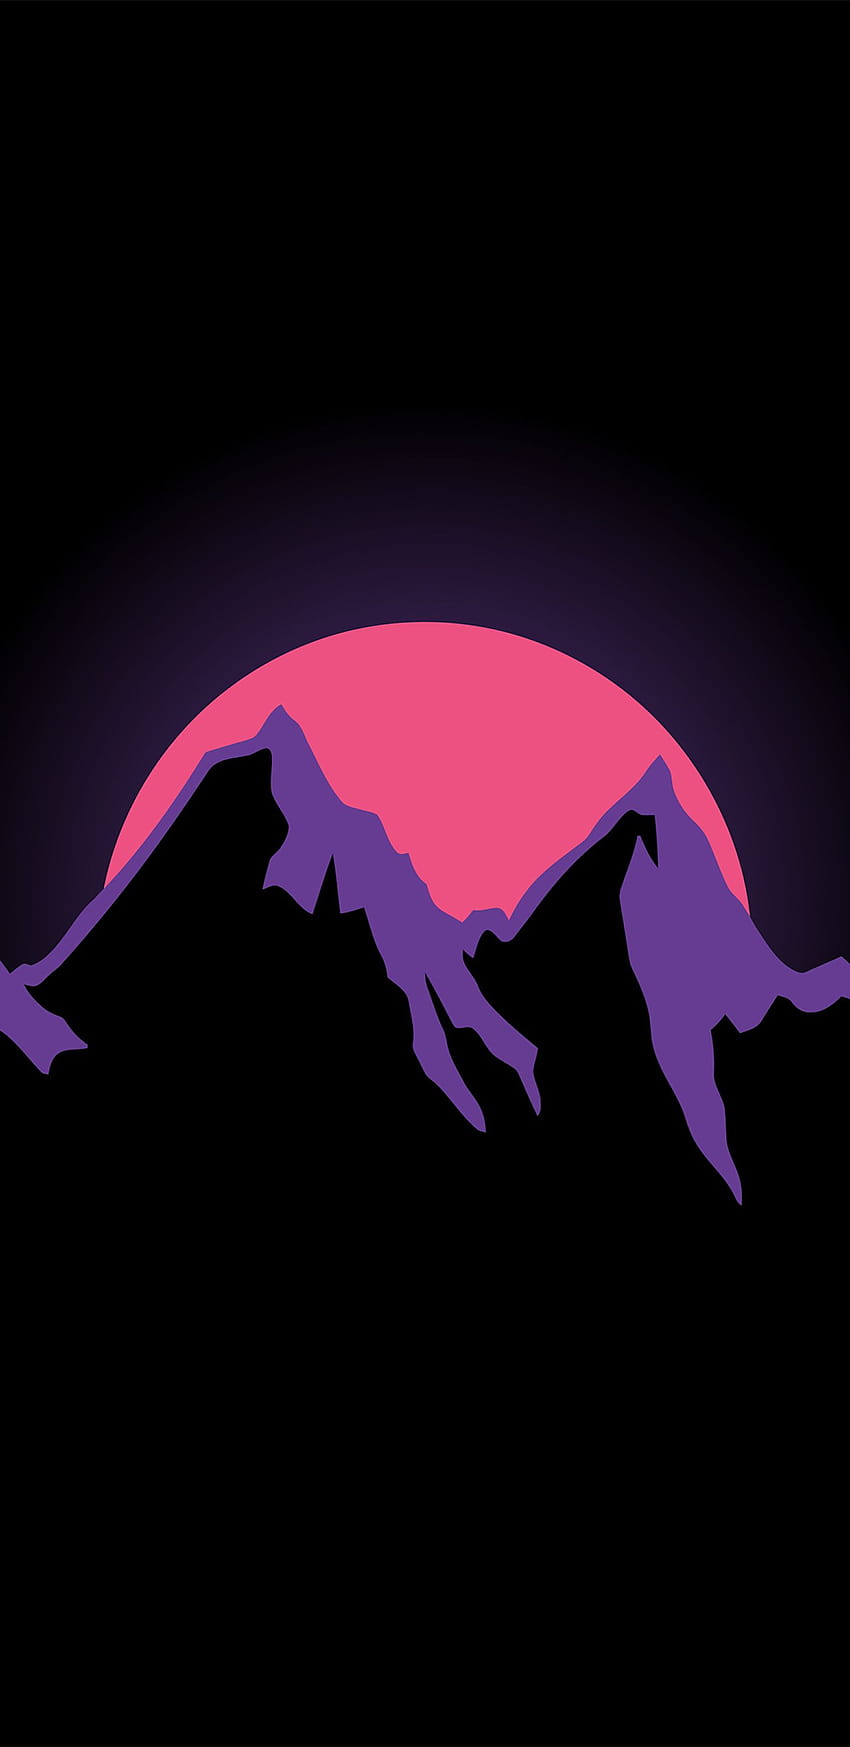 1440x2960 Mountains Amoled Samsung Galaxy Note 9,8, S9,S8,S, 1440x2960 amoled HD phone wallpaper